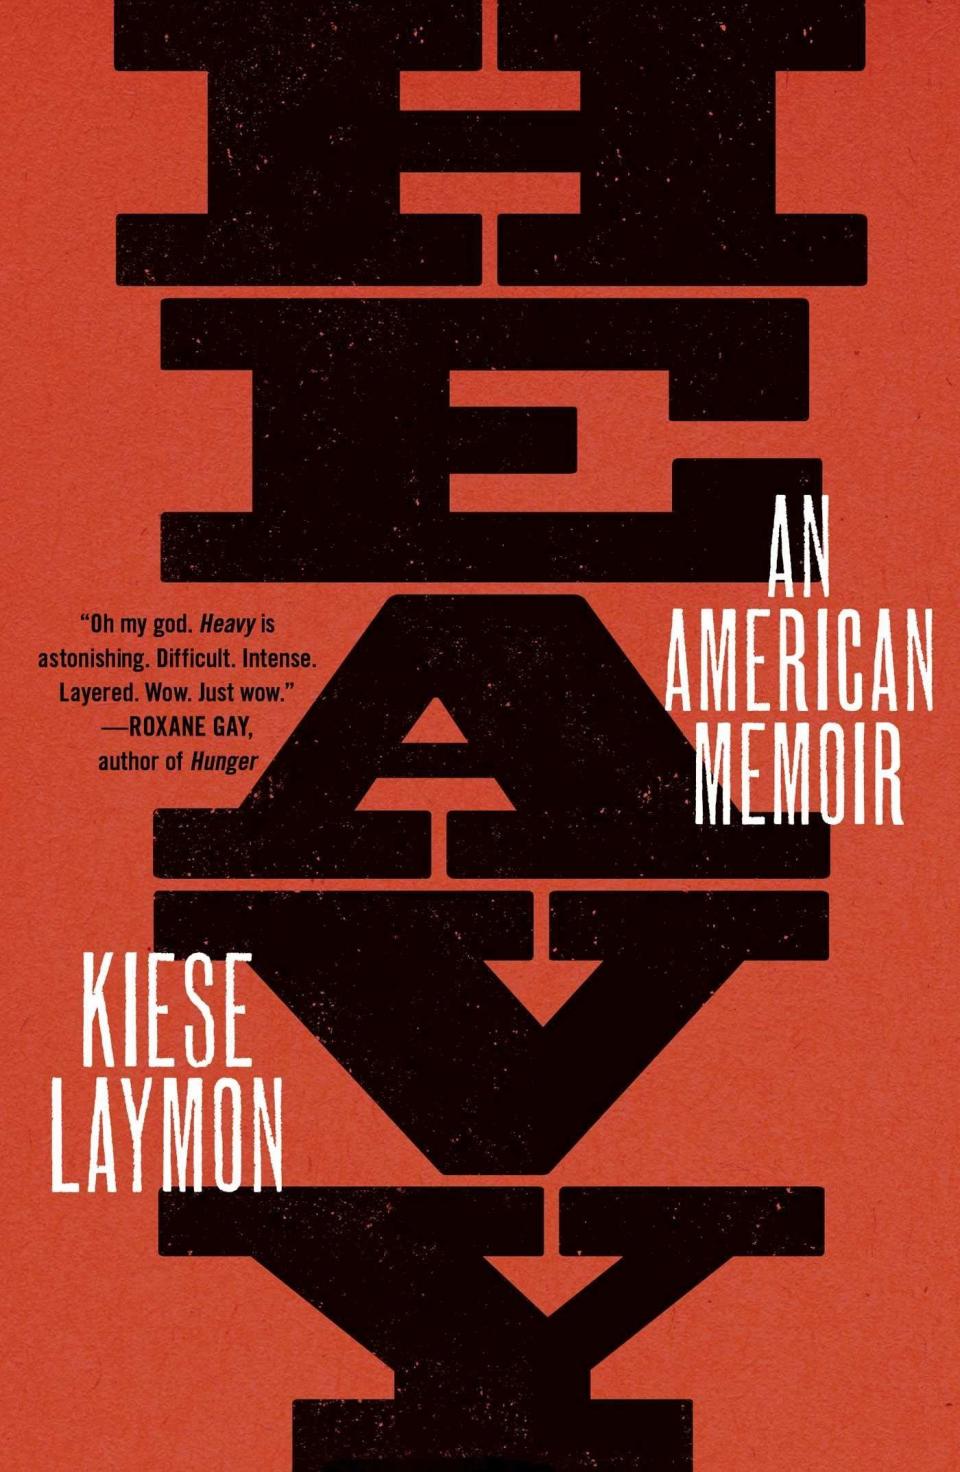 "<i>H</i><i>eavy</i>&nbsp;is a dark book, and the trauma that Laymon orbits is almost like a black hole; its shape is circular. Even when he finally tries to have an honest conversation with his mother (at a casino, of all places) about the things he&rsquo;s experienced, the harms that befell him, it&rsquo;s still impossible for either one to understand the other without blame." -- <a href="https://www.thenation.com/article/the-weight-and-power-of-kiese-laymons-heavy/" target="_blank" rel="noopener noreferrer">The Nation</a>